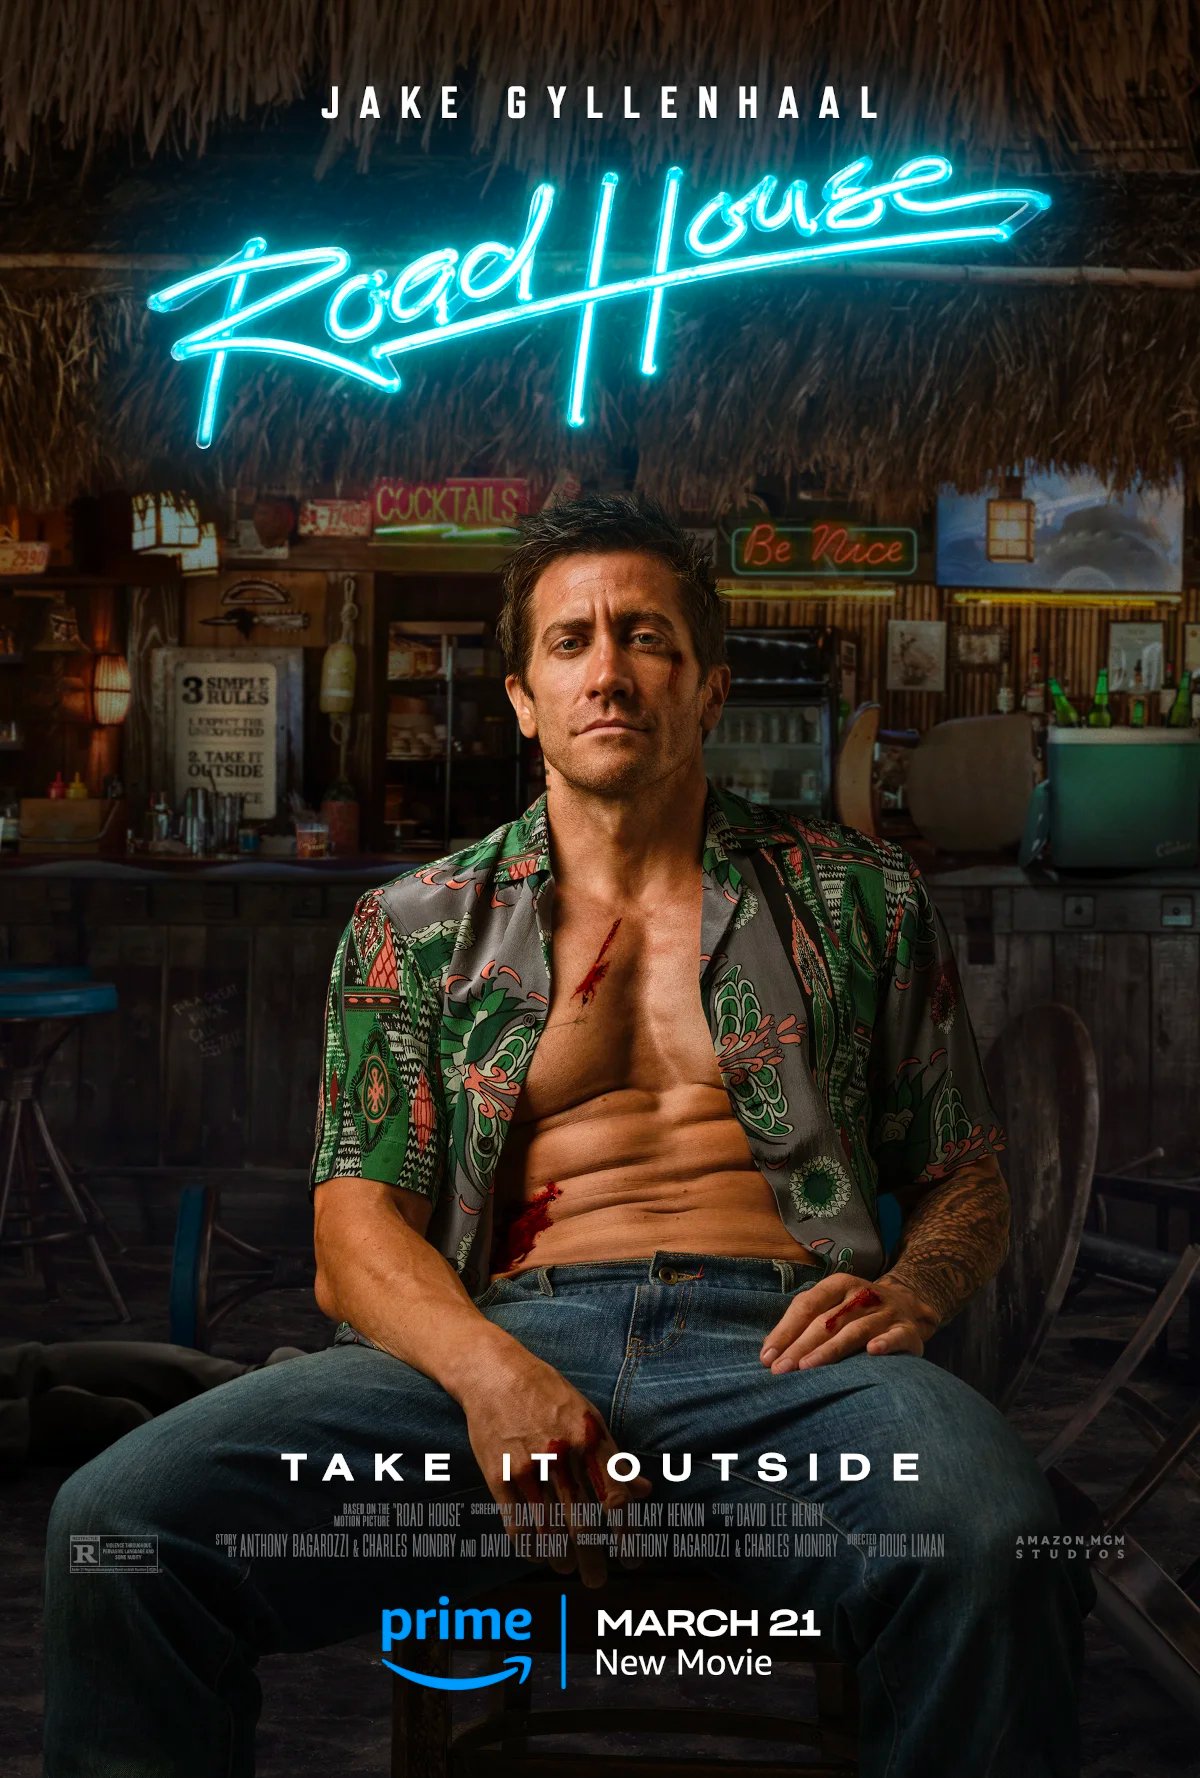 Jake Gyllenhaal in the poster for the 'Road House' remake